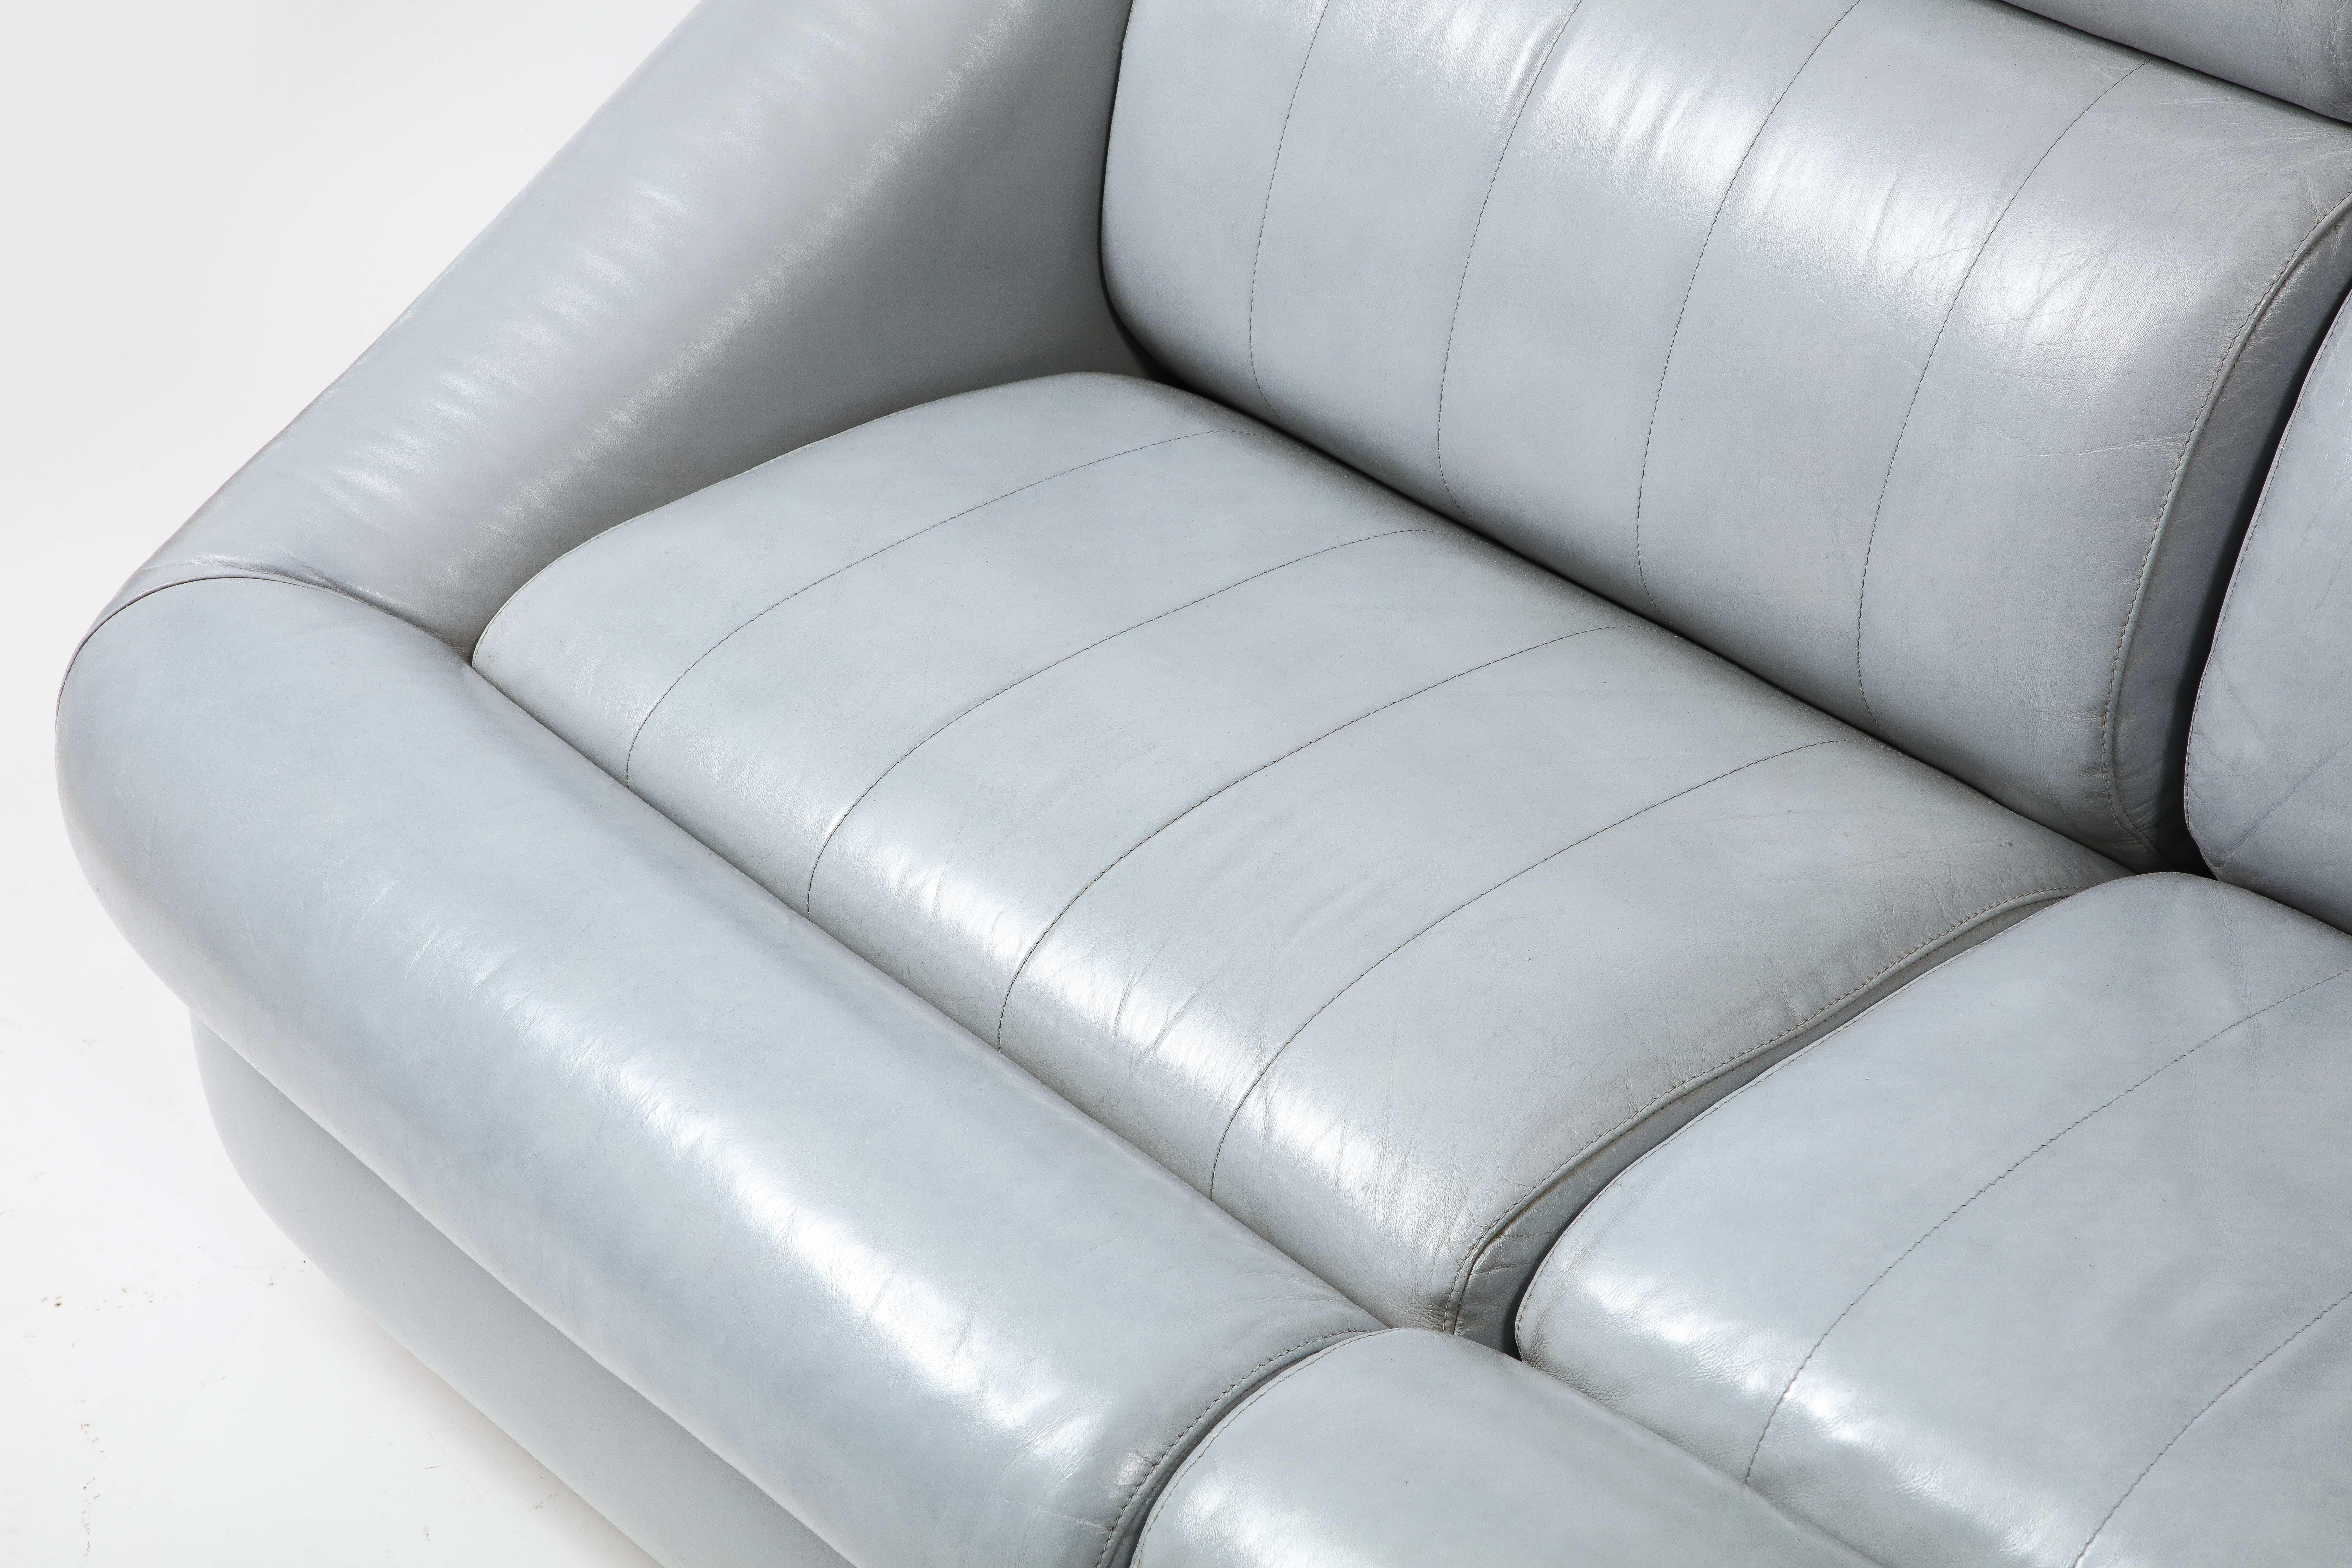 Aluminum Cantu Grey Leather Settee, Italy 1970's For Sale